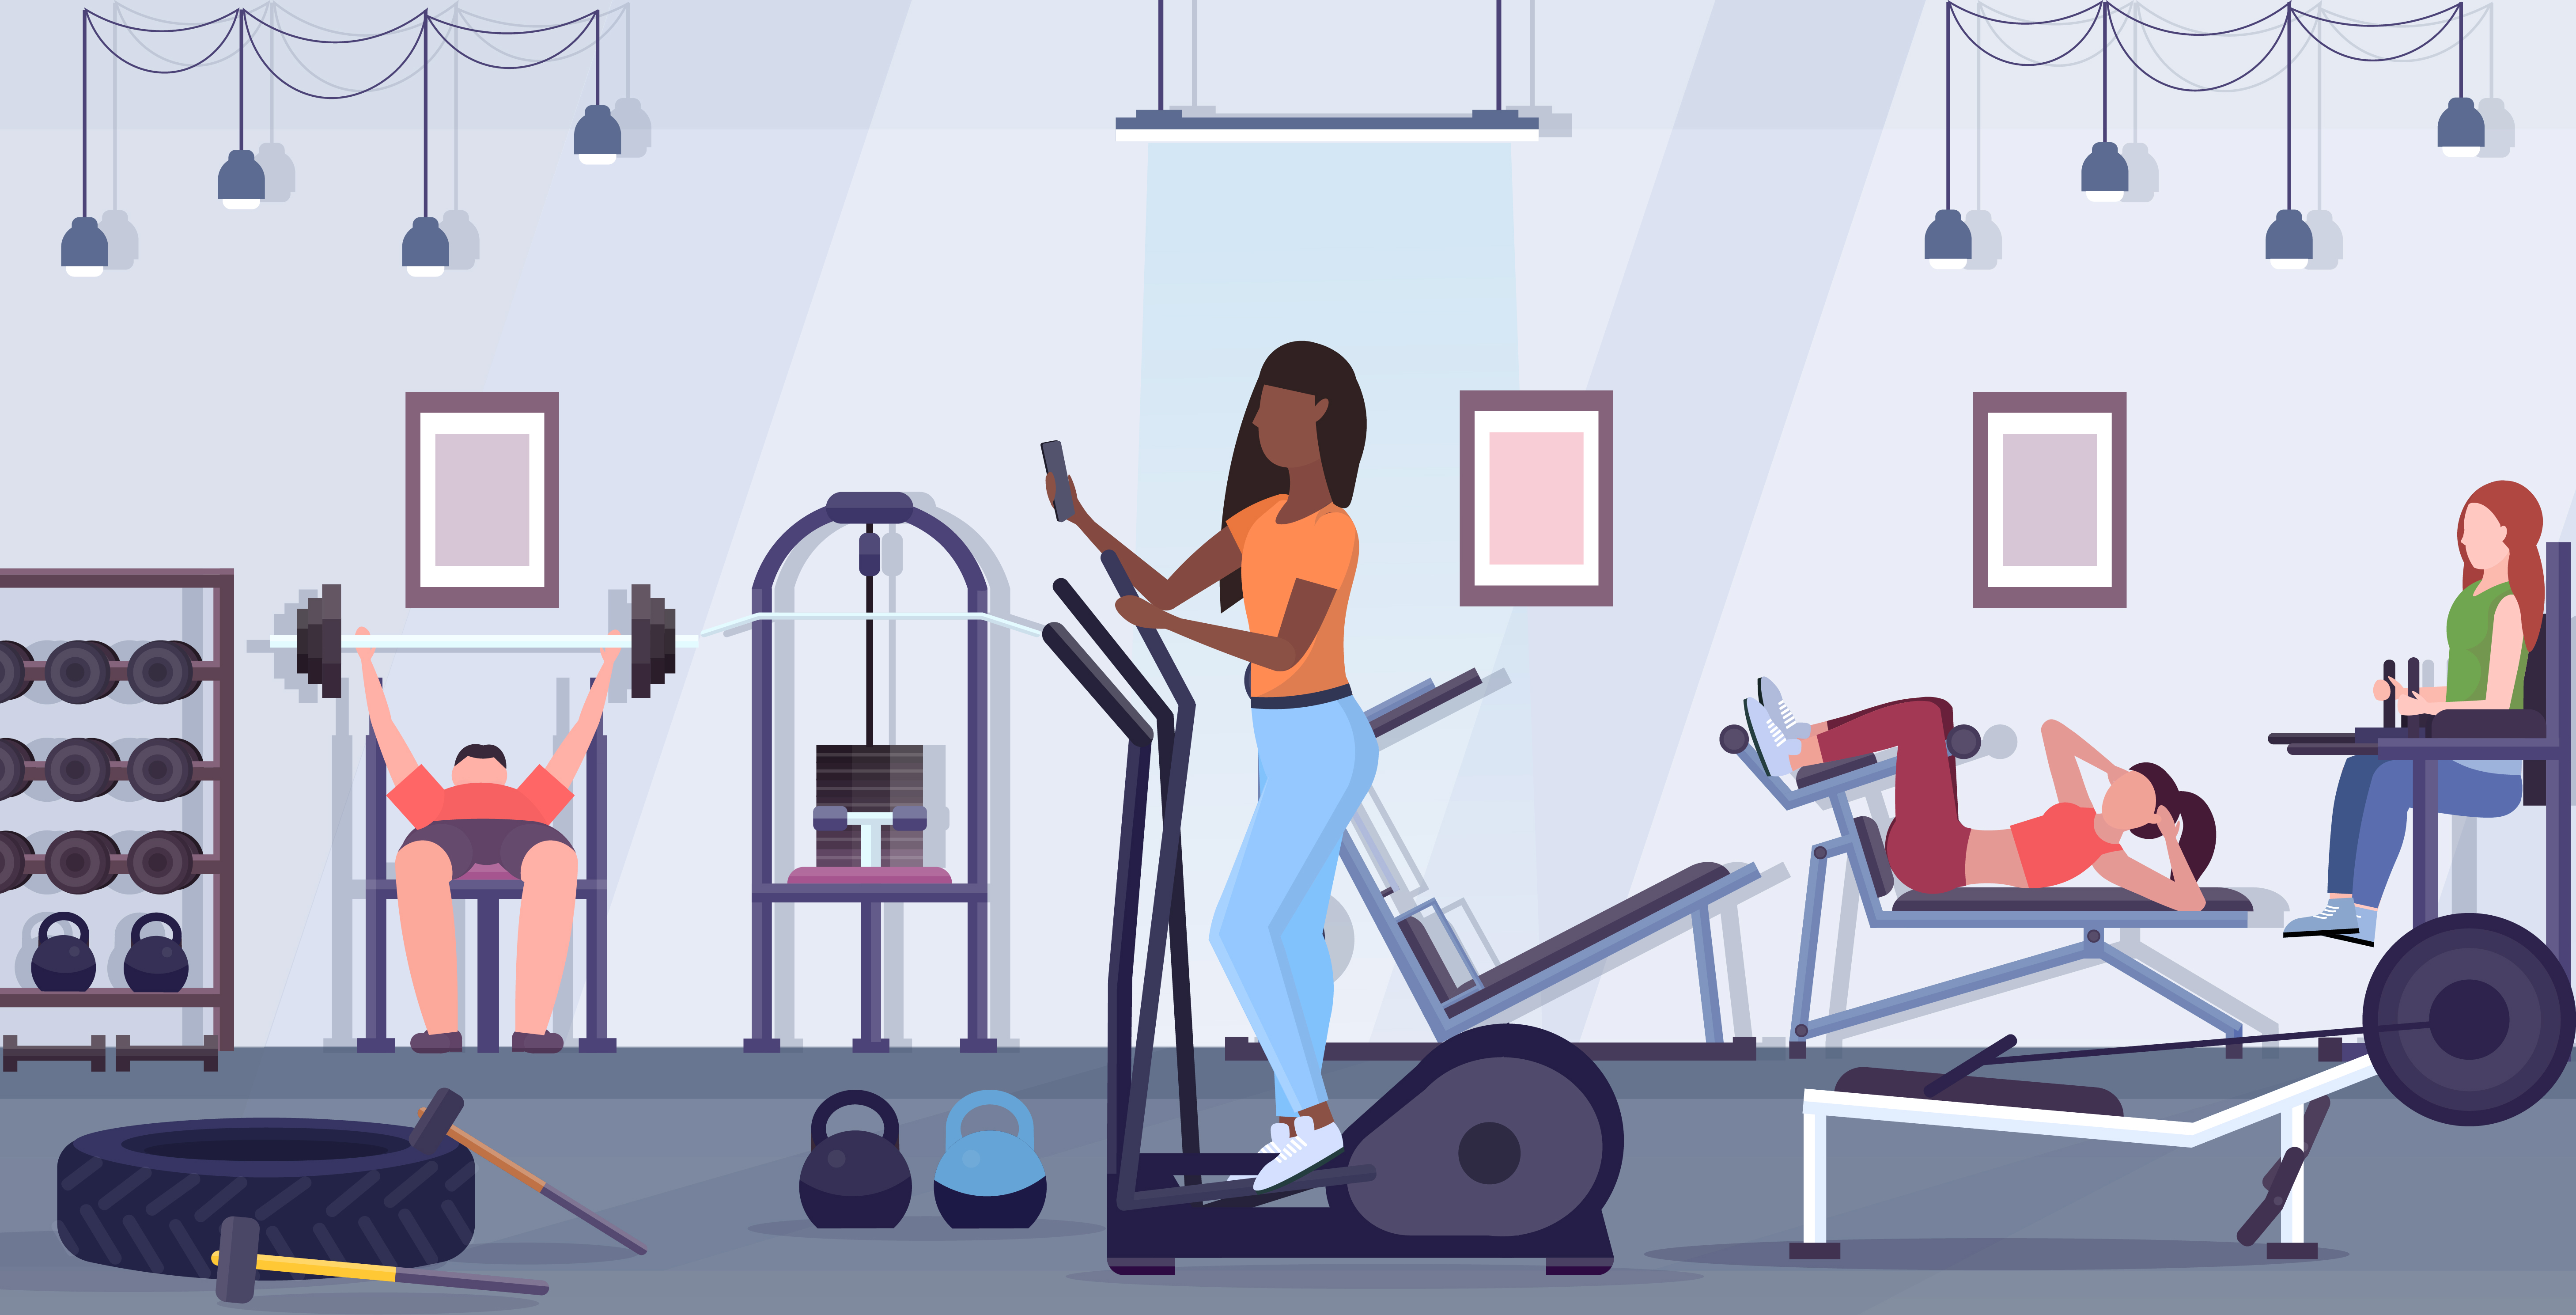 An illustration of women at a gym.